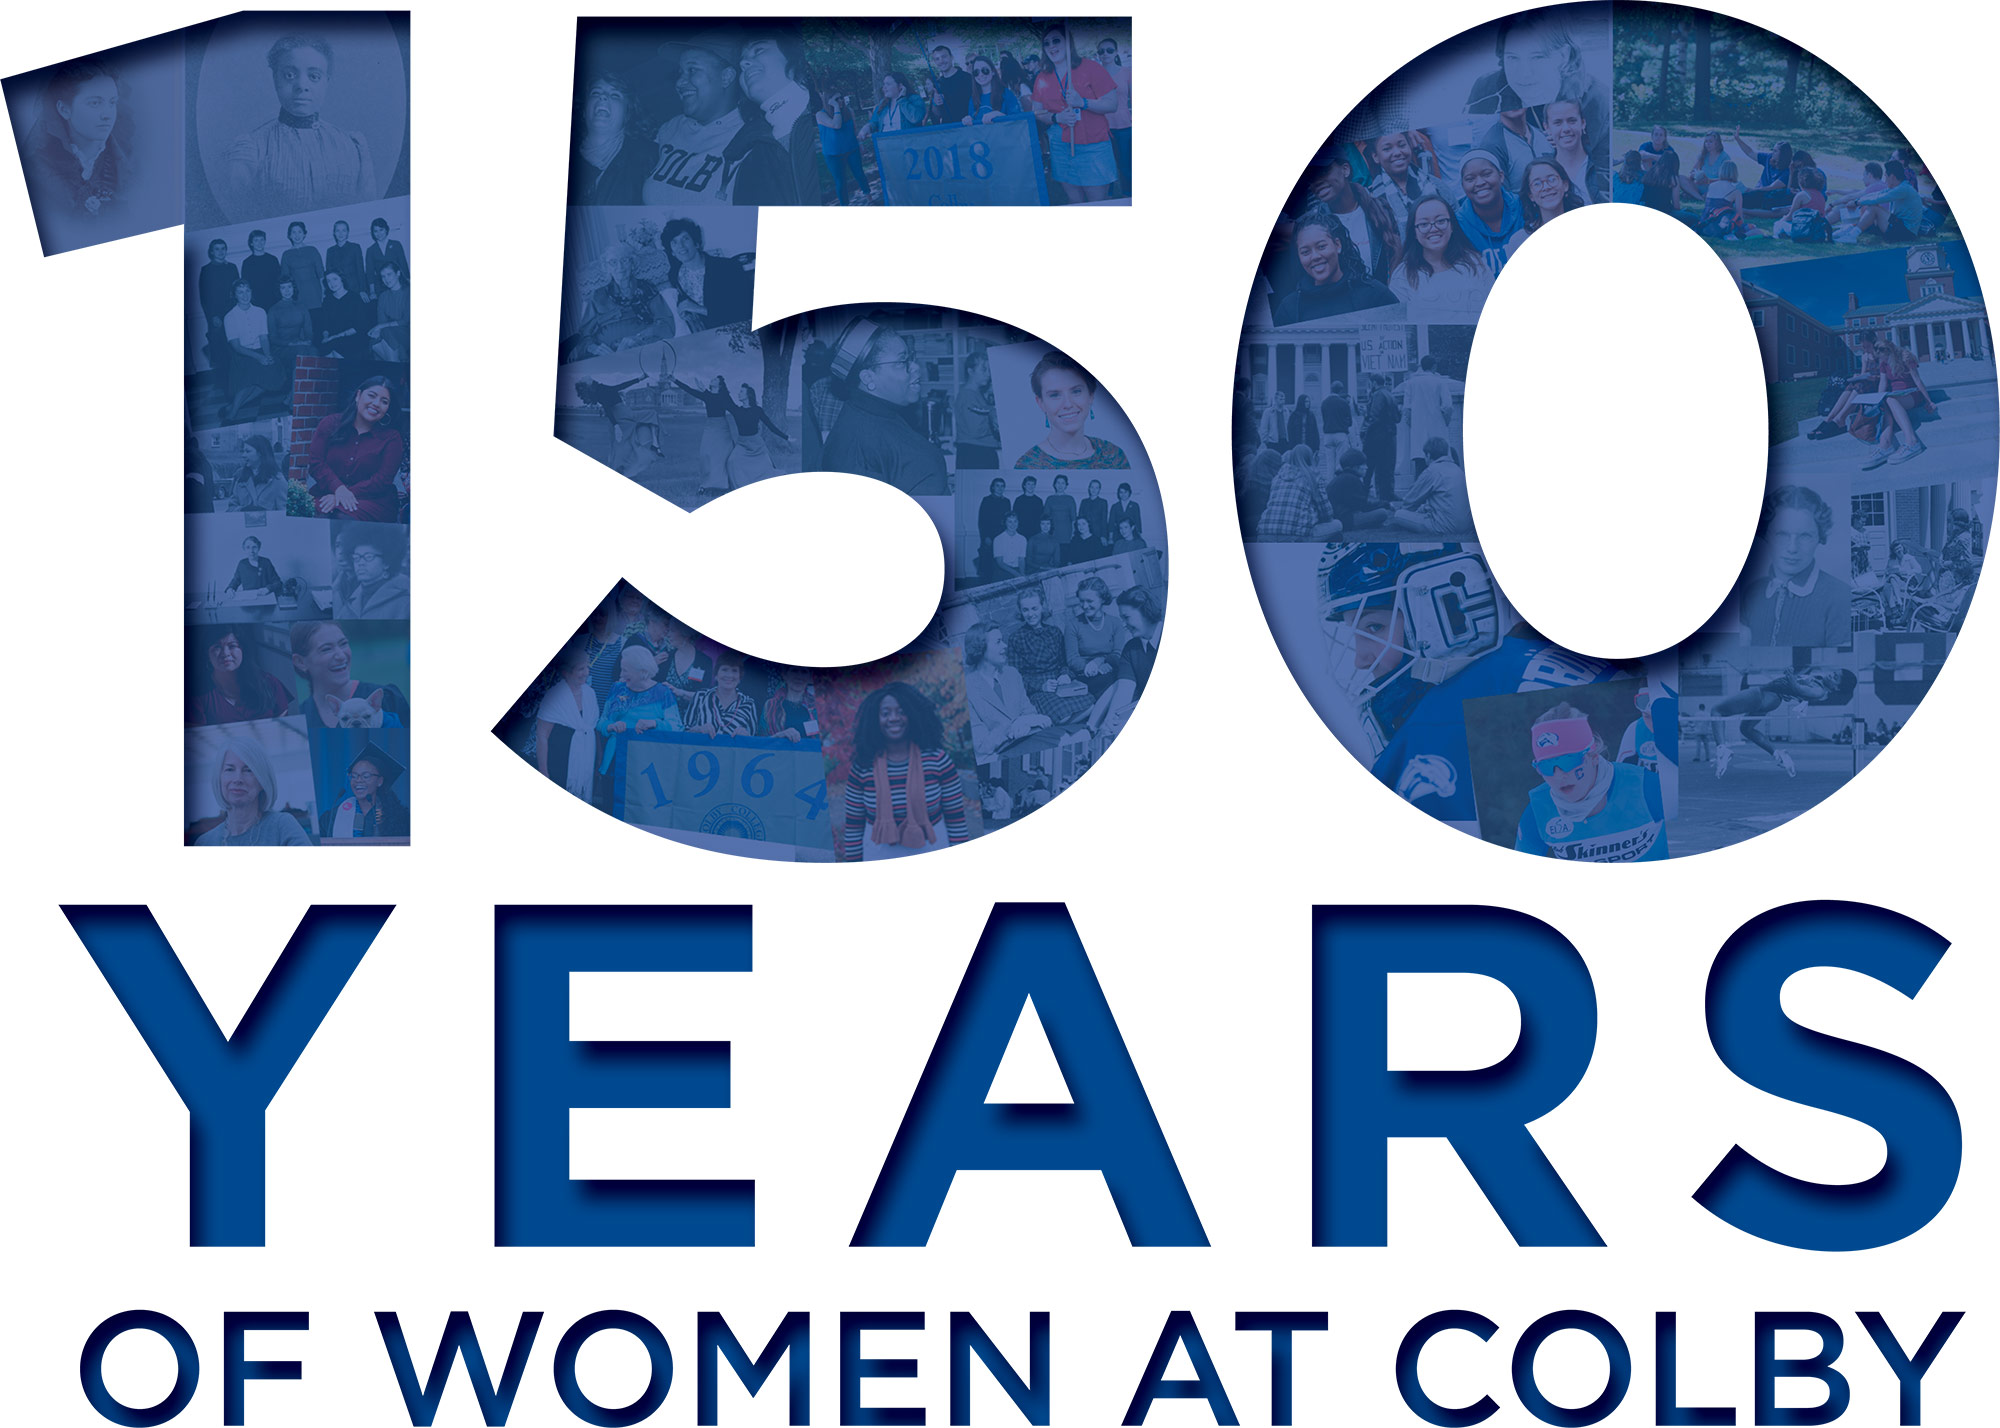 150 years of women at colby typograhpy